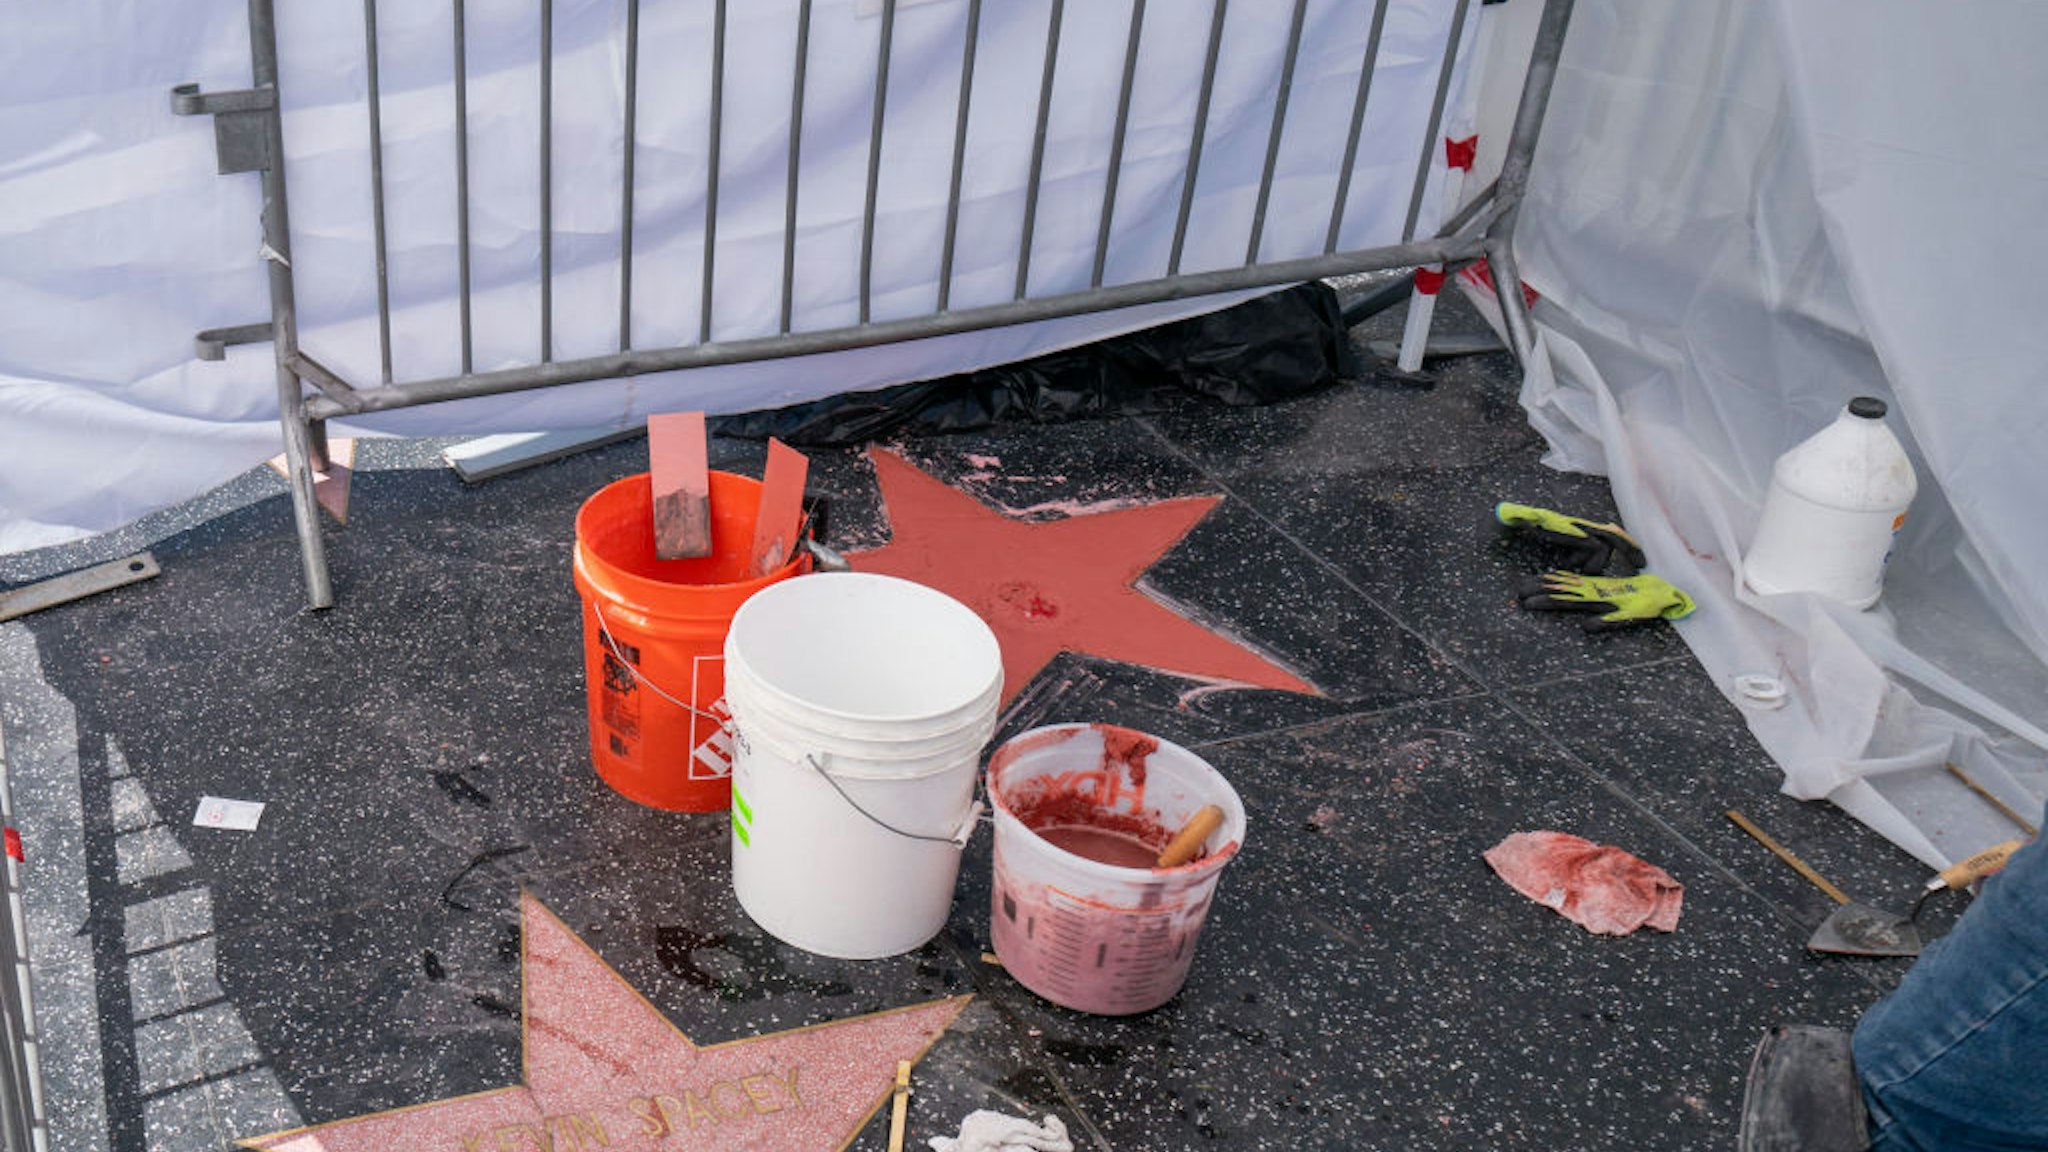 HOLLYWOOD, CA - OCTOBER 02: Workers respond to reforge Donald Trump's star on the Walk of Fame after it was destroyed by vandals early Friday morning on October 02, 2020 in Hollywood, California.